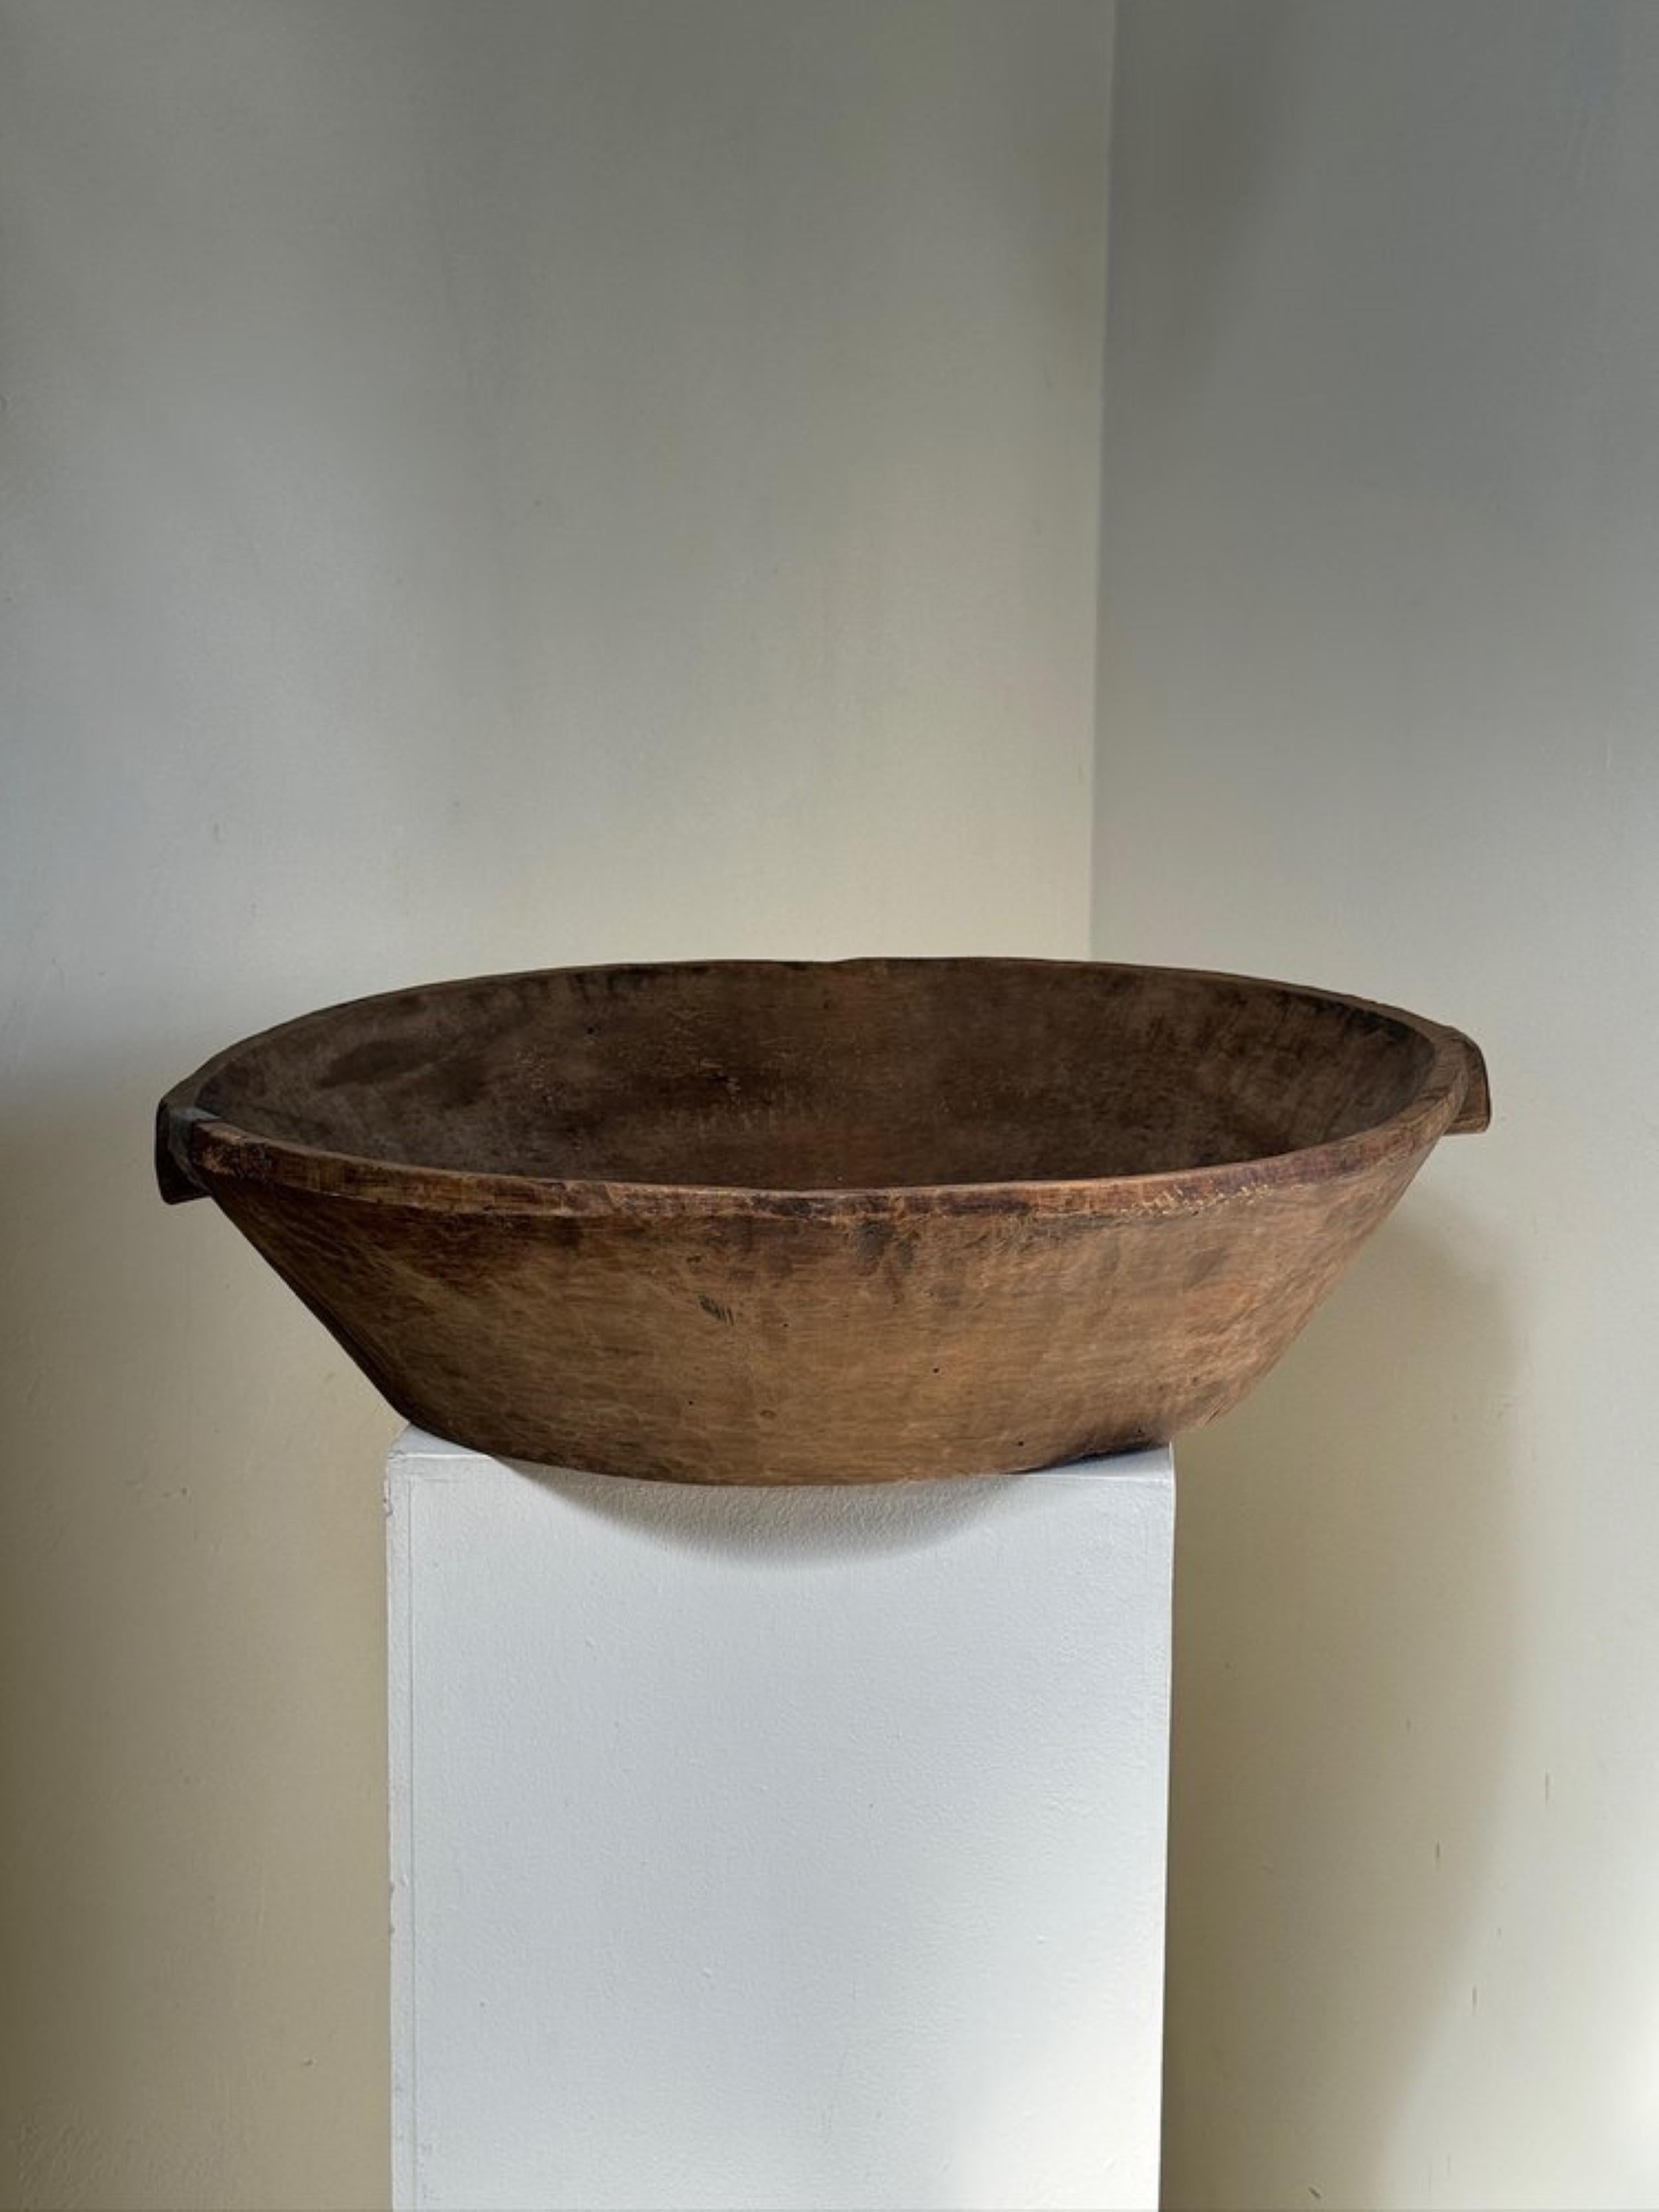 This sizable vintage wooden bowl embodies the essence of wabi-sabi, showcasing a primitive charm in its solid wood construction. Bearing the marks of its age and history, it remains in excellent vintage condition. Its distinct character adds